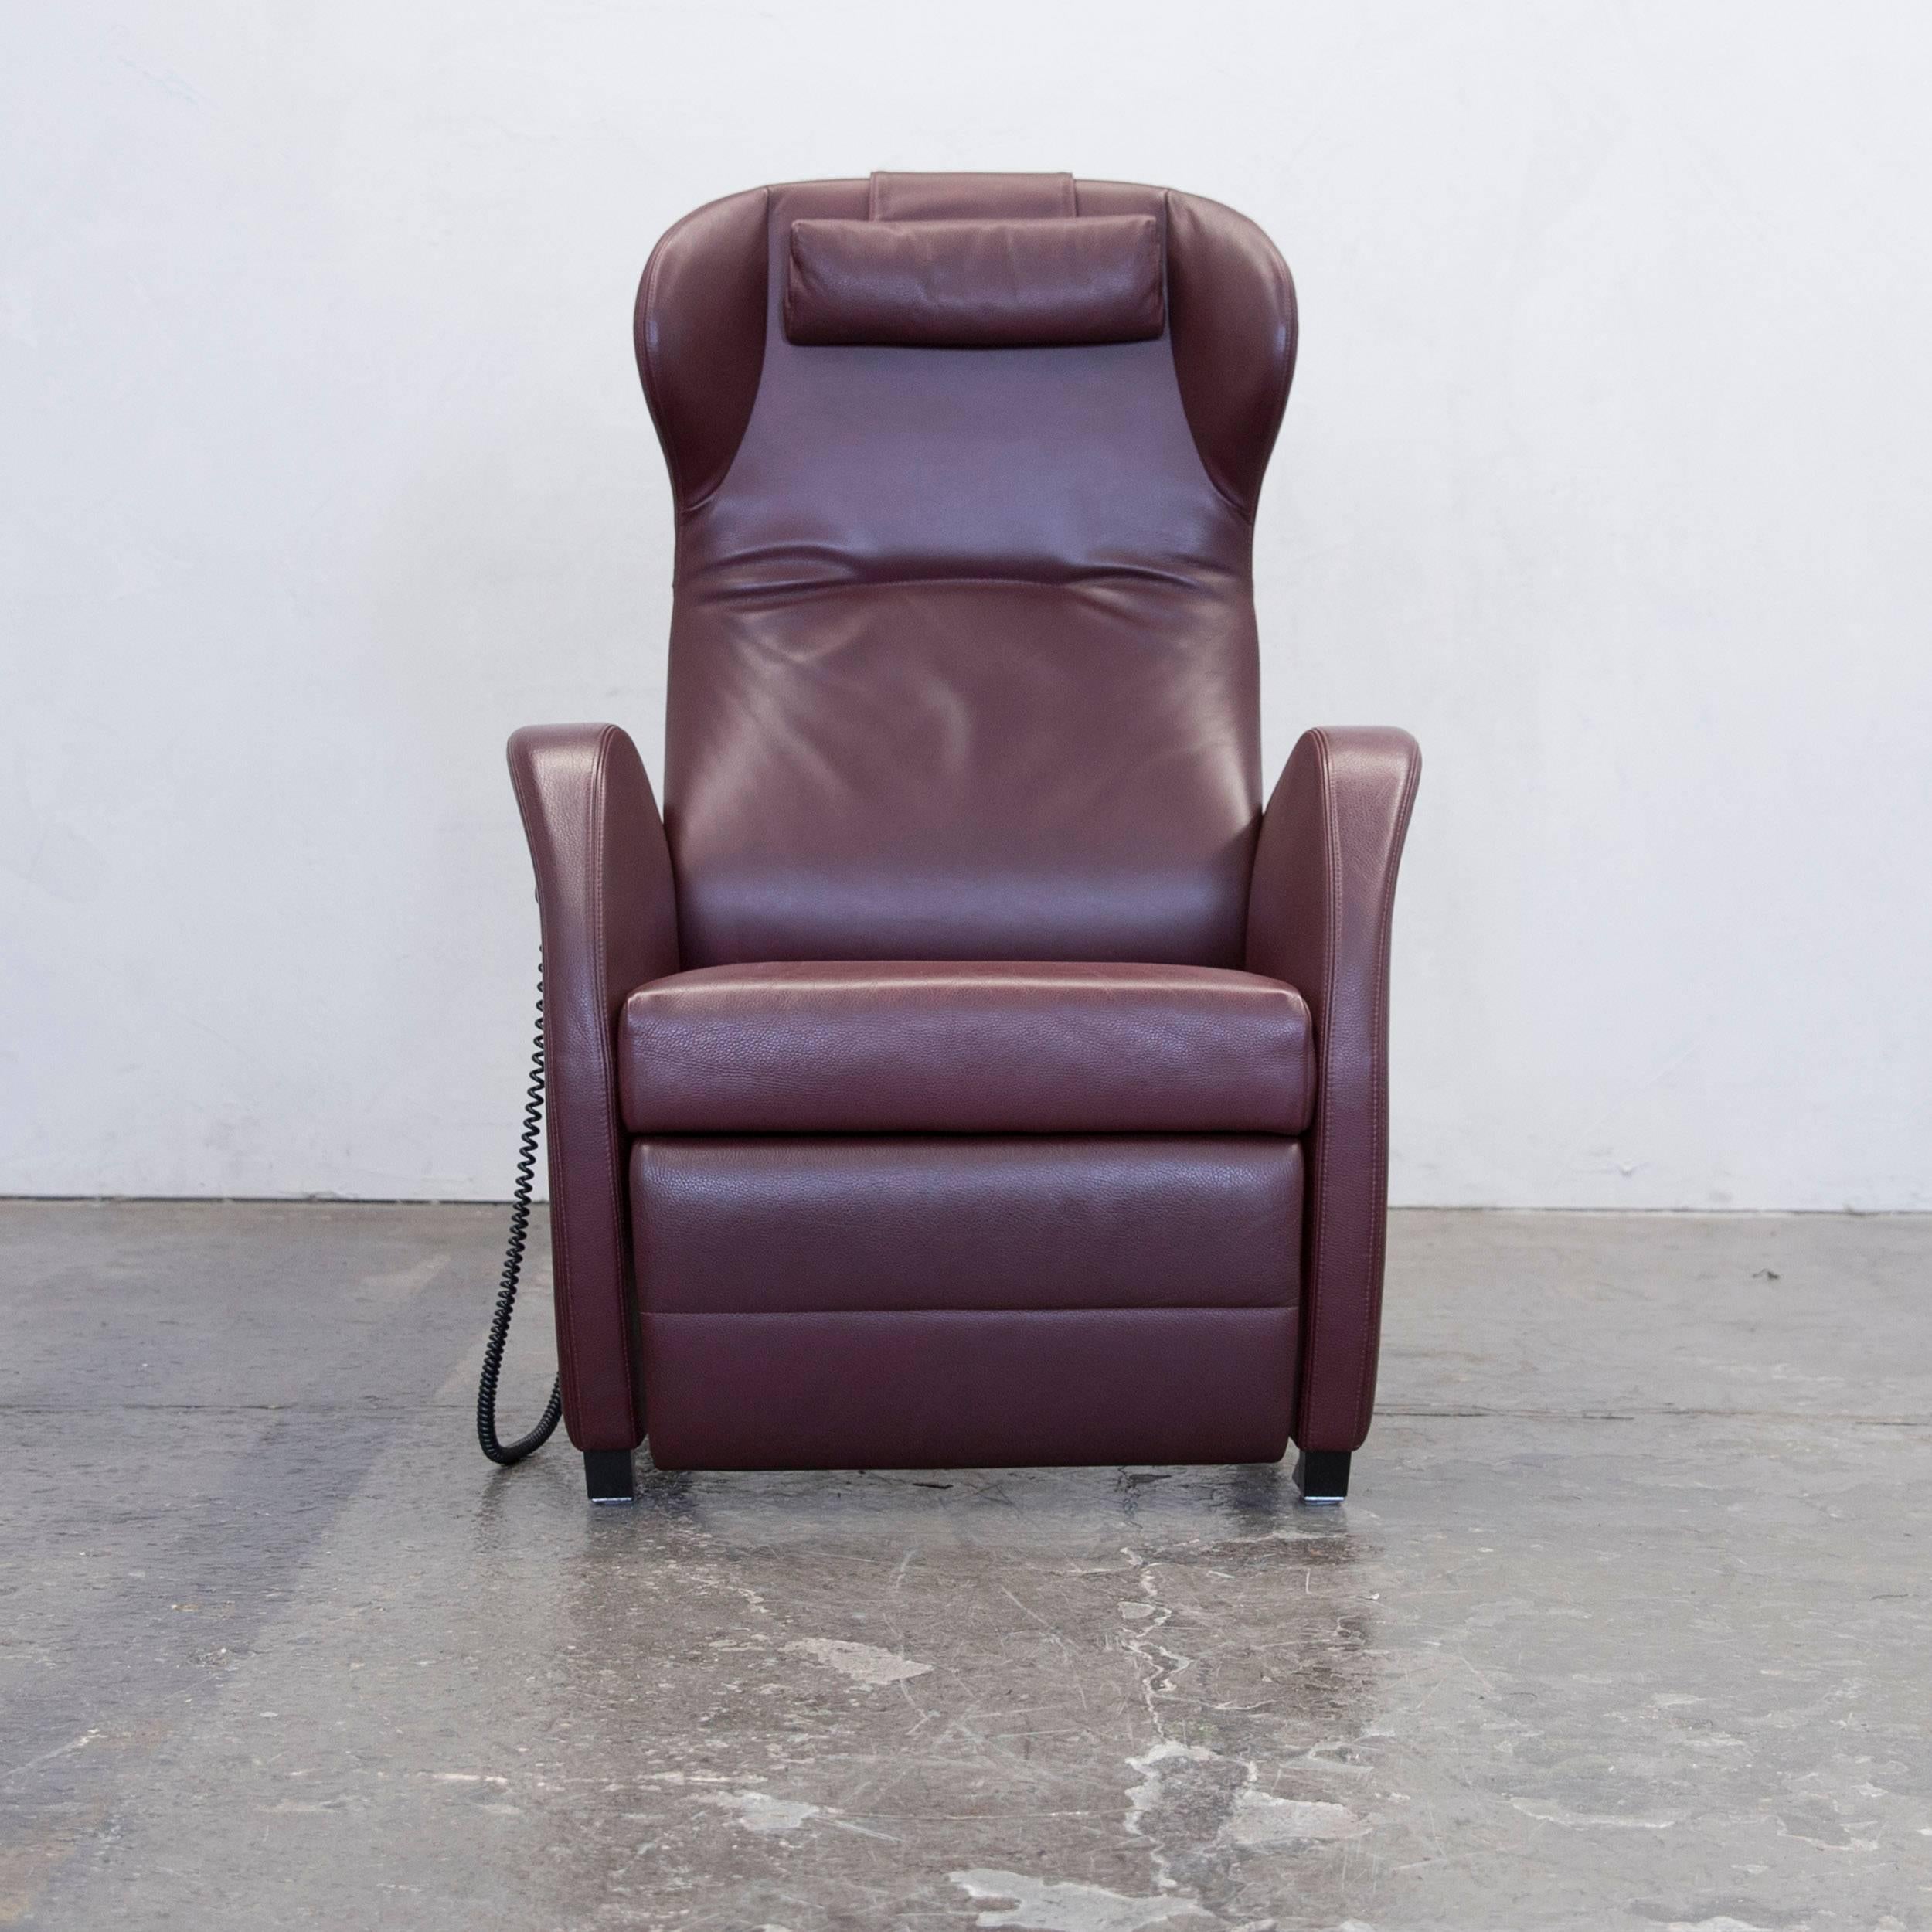 Wittmann Leather Chair Wine Red One Seat Relax 1